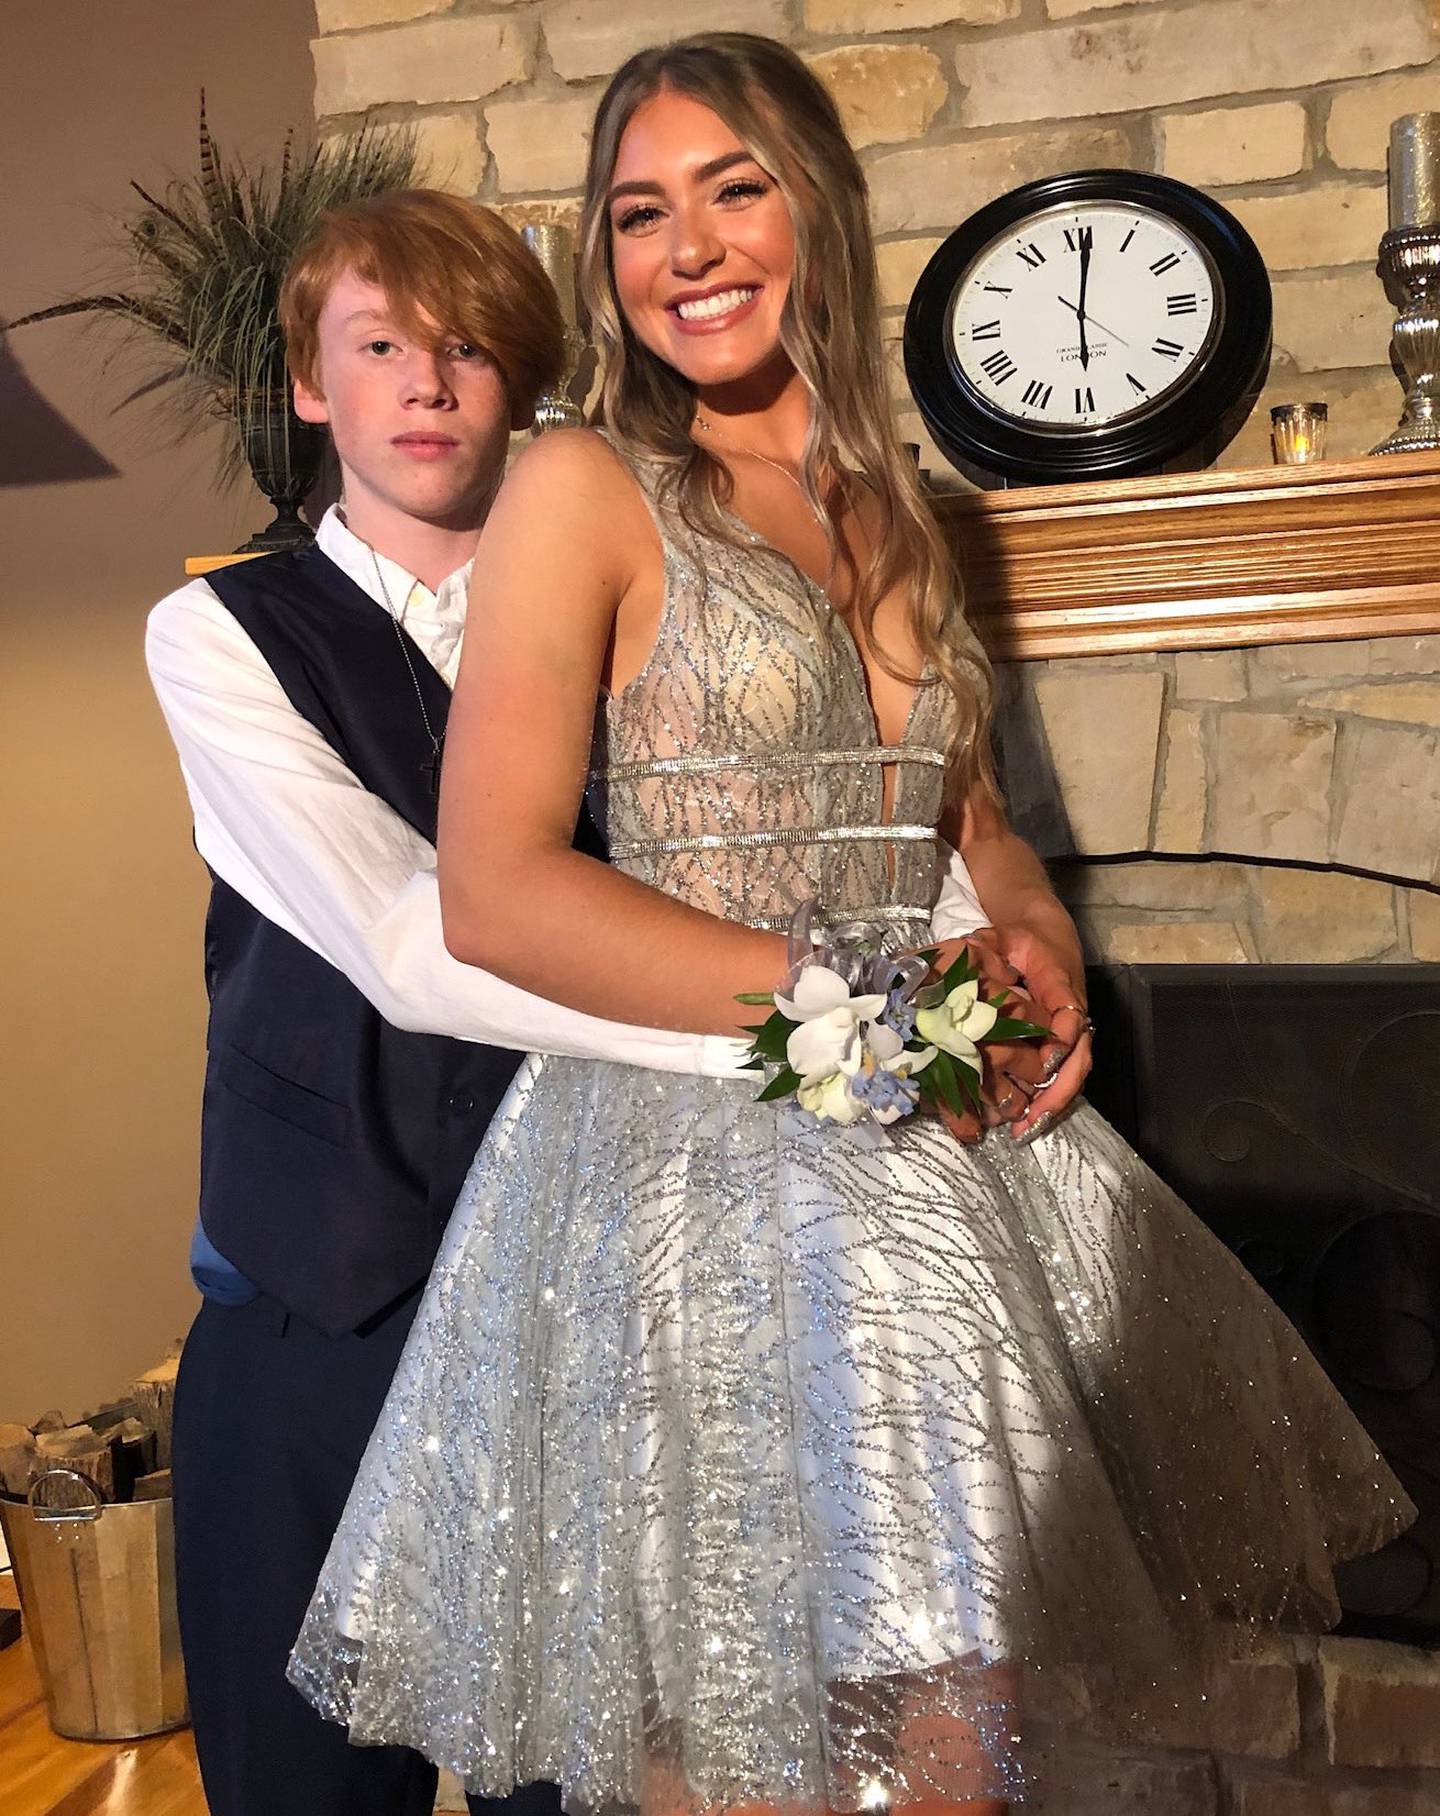 Emil Diewalt with friend Lauren Head before going to Central High School’s 2019 Homecoming, pretending to be her date for the photo. Emil and his sister Grace were both killed in a car crash on Monday.